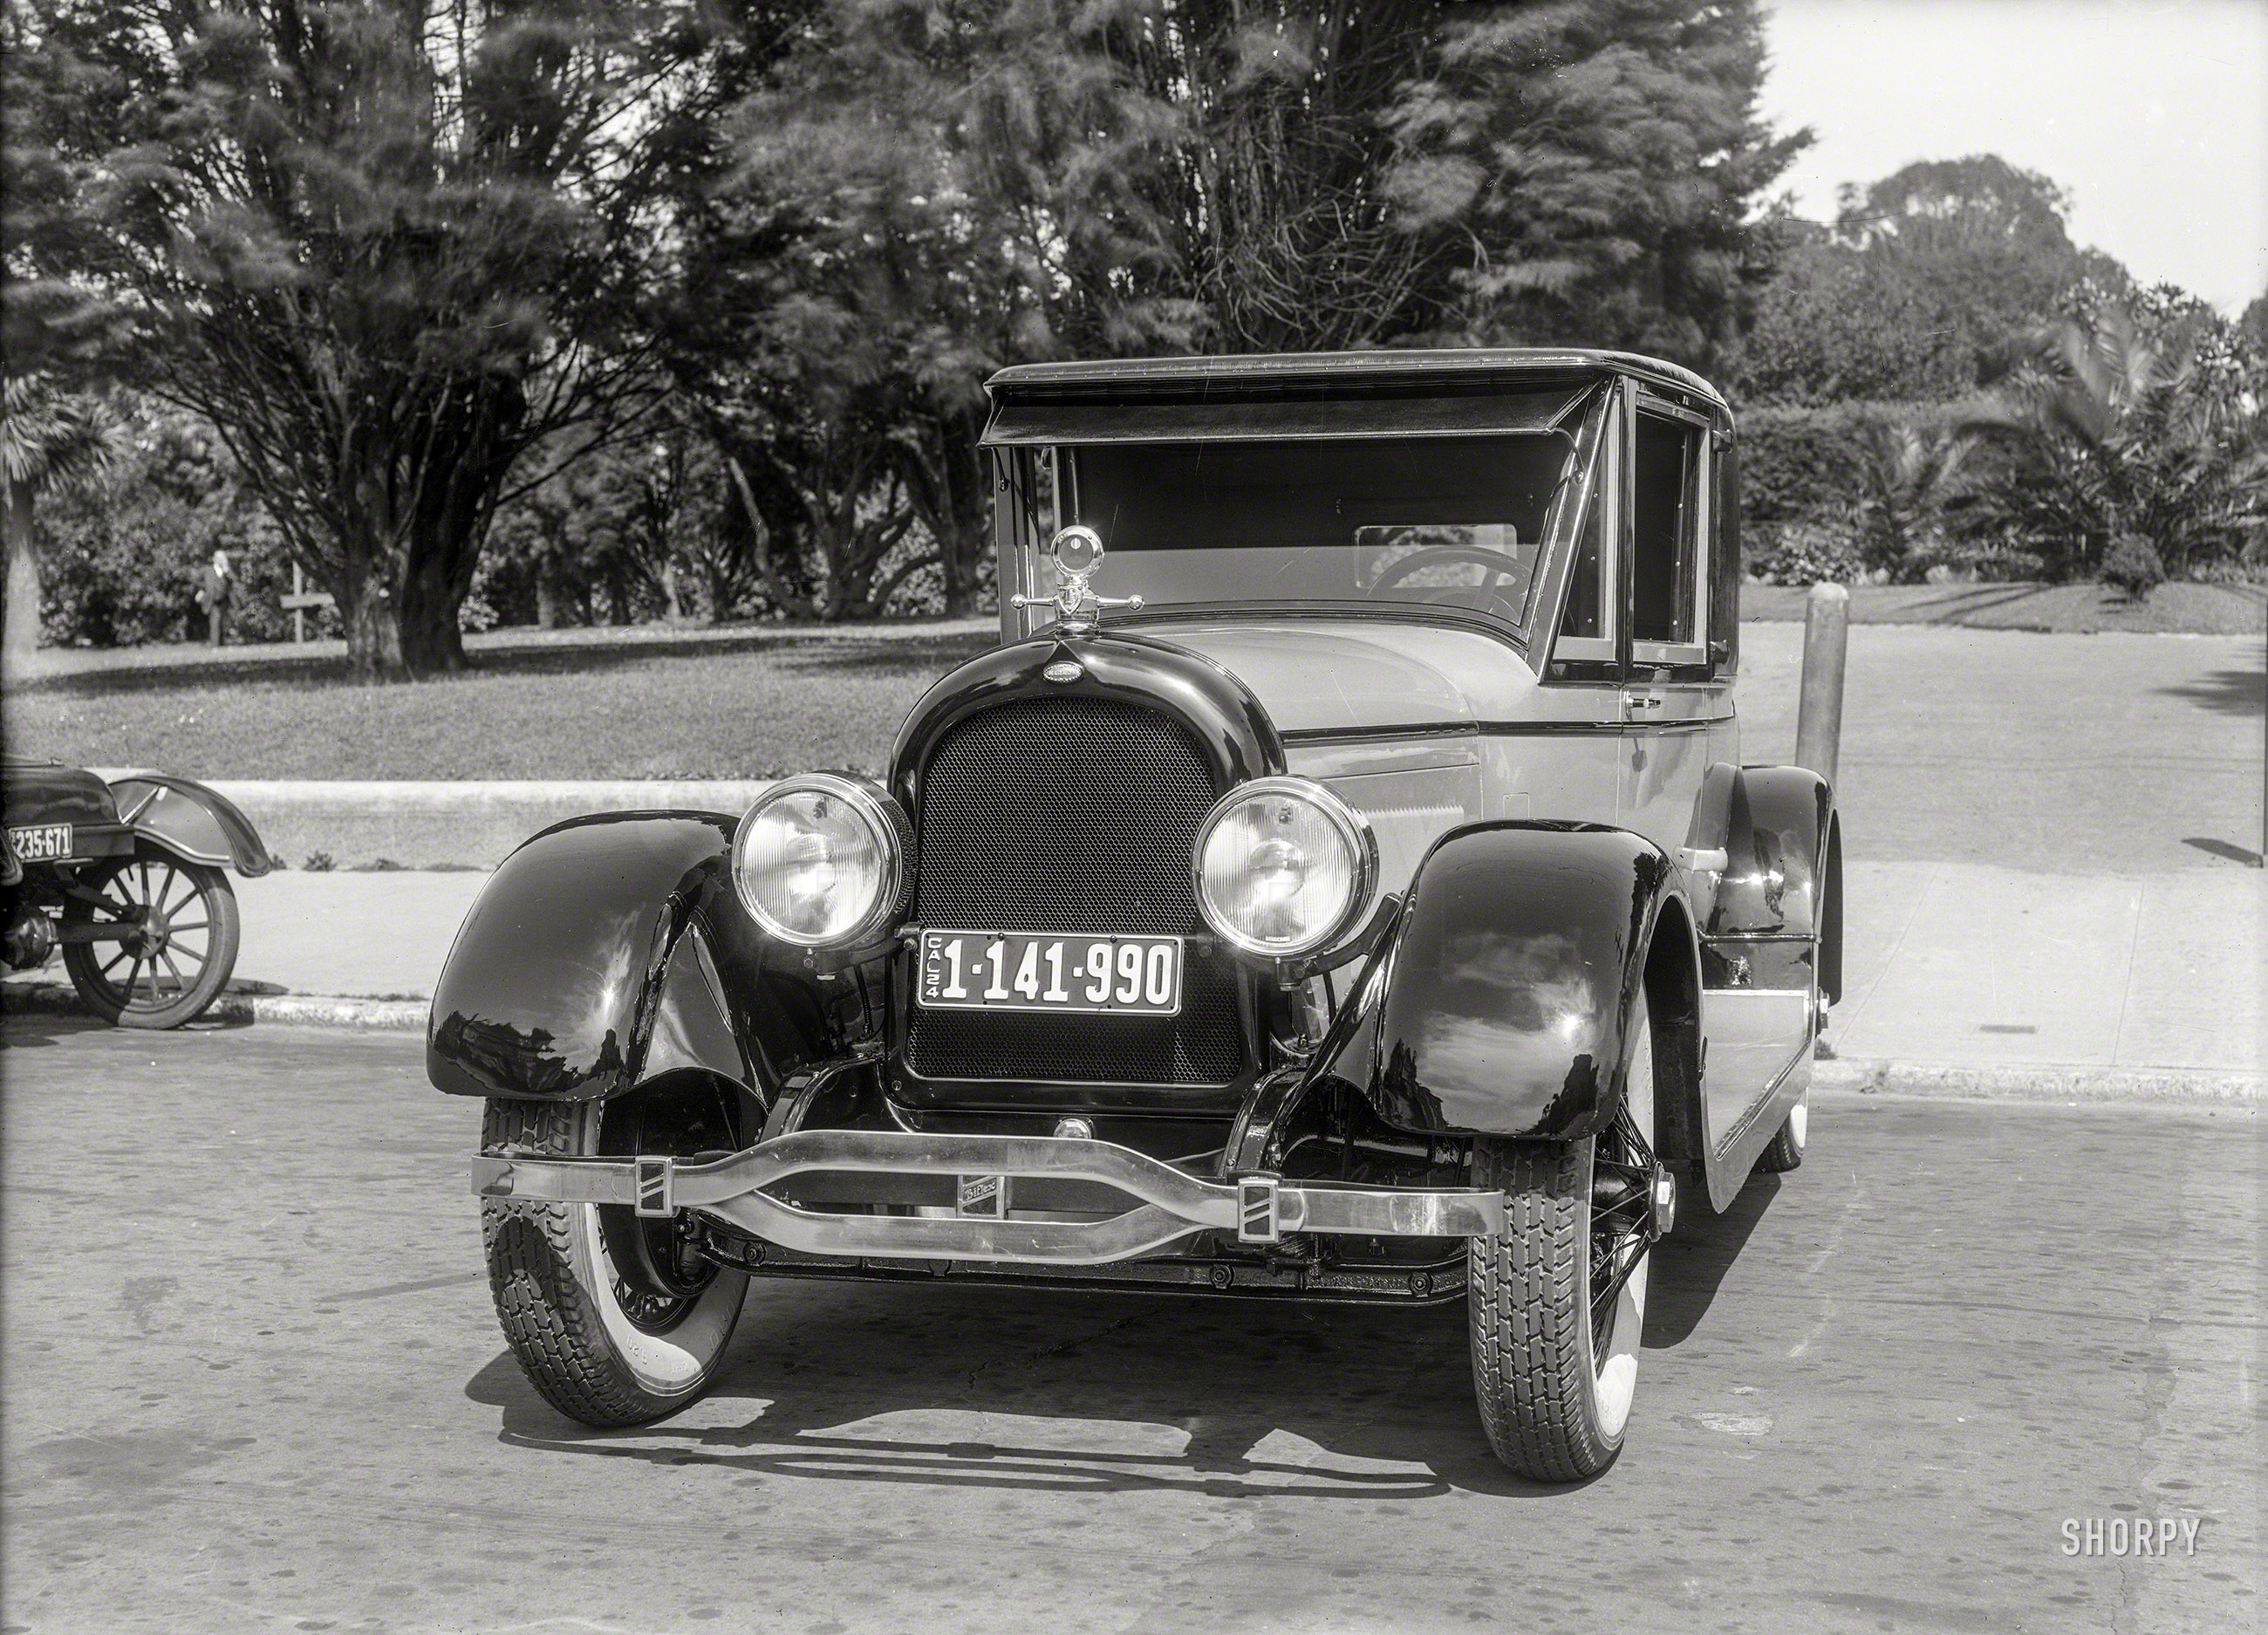 San Francisco, 1924. "Marmon coupe at Golden Gate Park." Equipped with a Biflex bumper. Latest exhibit in the Shorpy Diorama of Defunct Dreadnoughts. 5x7 glass negative by Christopher Helin. View full size.